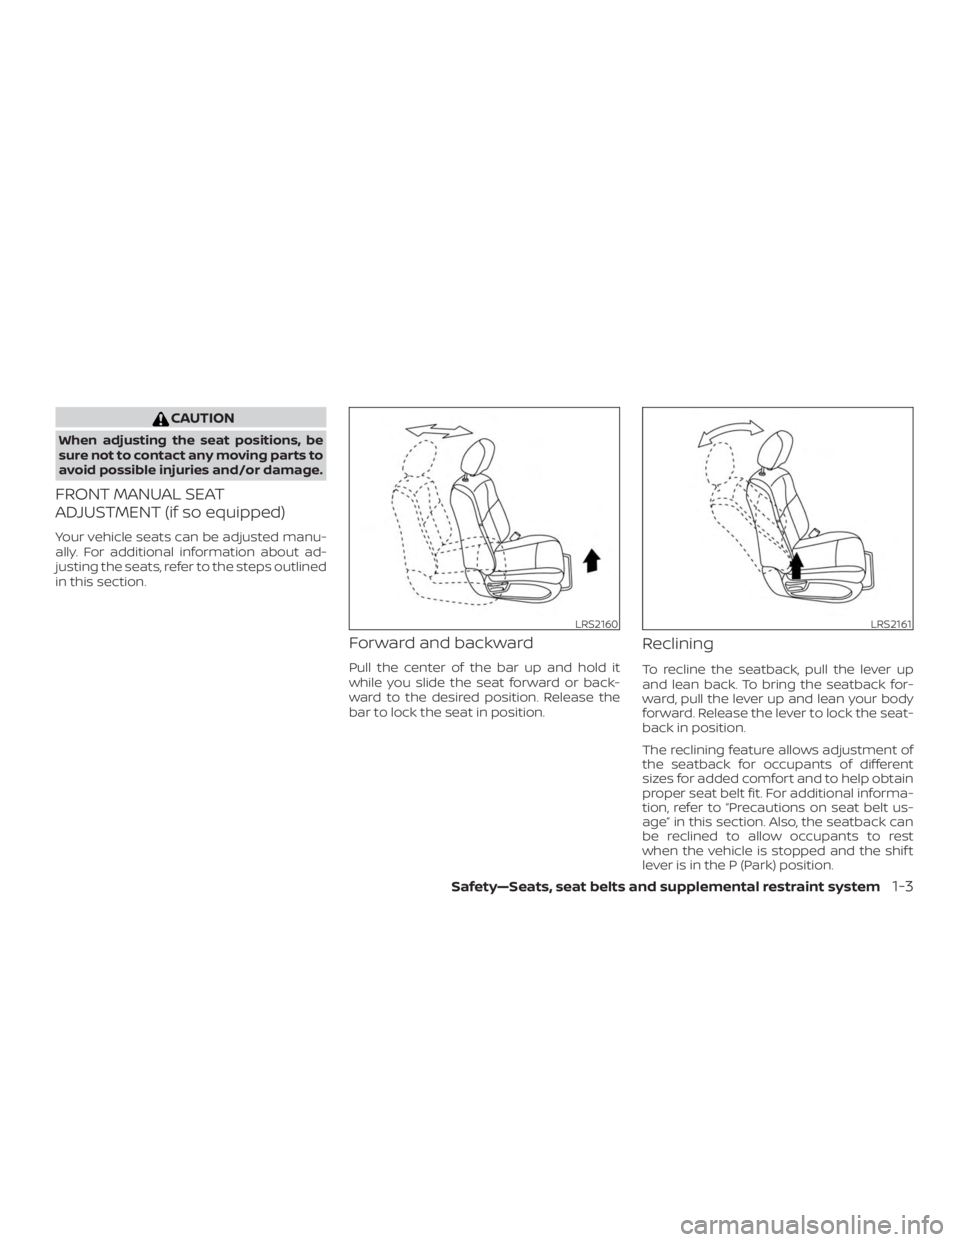 NISSAN PATHFINDER 2020  Owner´s Manual CAUTION
When adjusting the seat positions, be
sure not to contact any moving parts to
avoid possible injuries and/or damage.
FRONT MANUAL SEAT
ADJUSTMENT (if so equipped)
Your vehicle seats can be adj